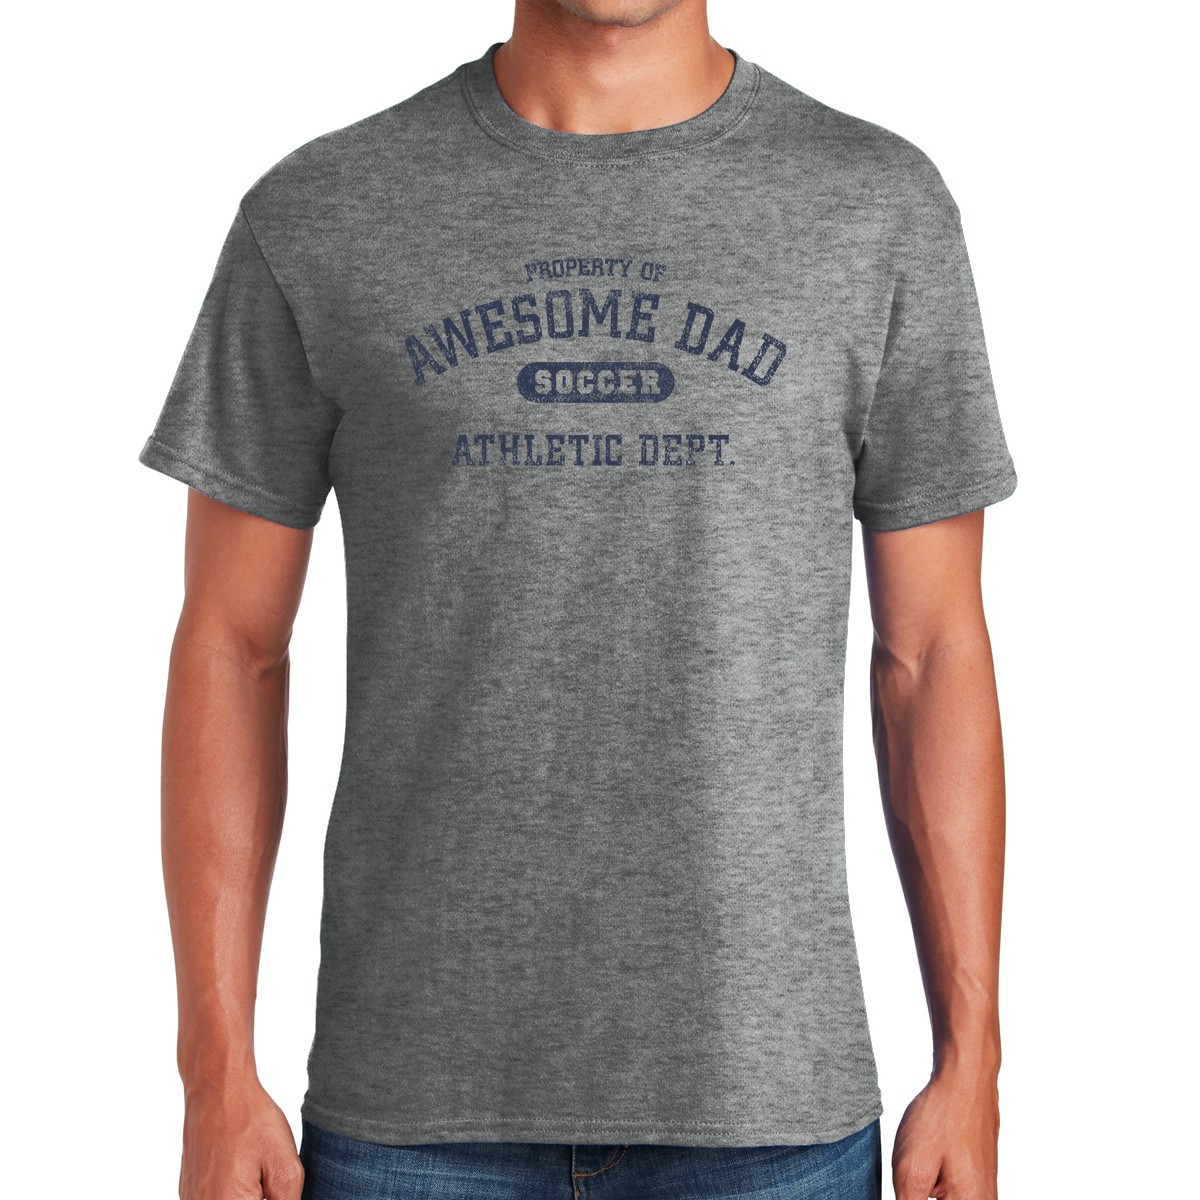 Property Of Awesome Dad Soccer Athletic Dept. Gifts for Dads T-shirt